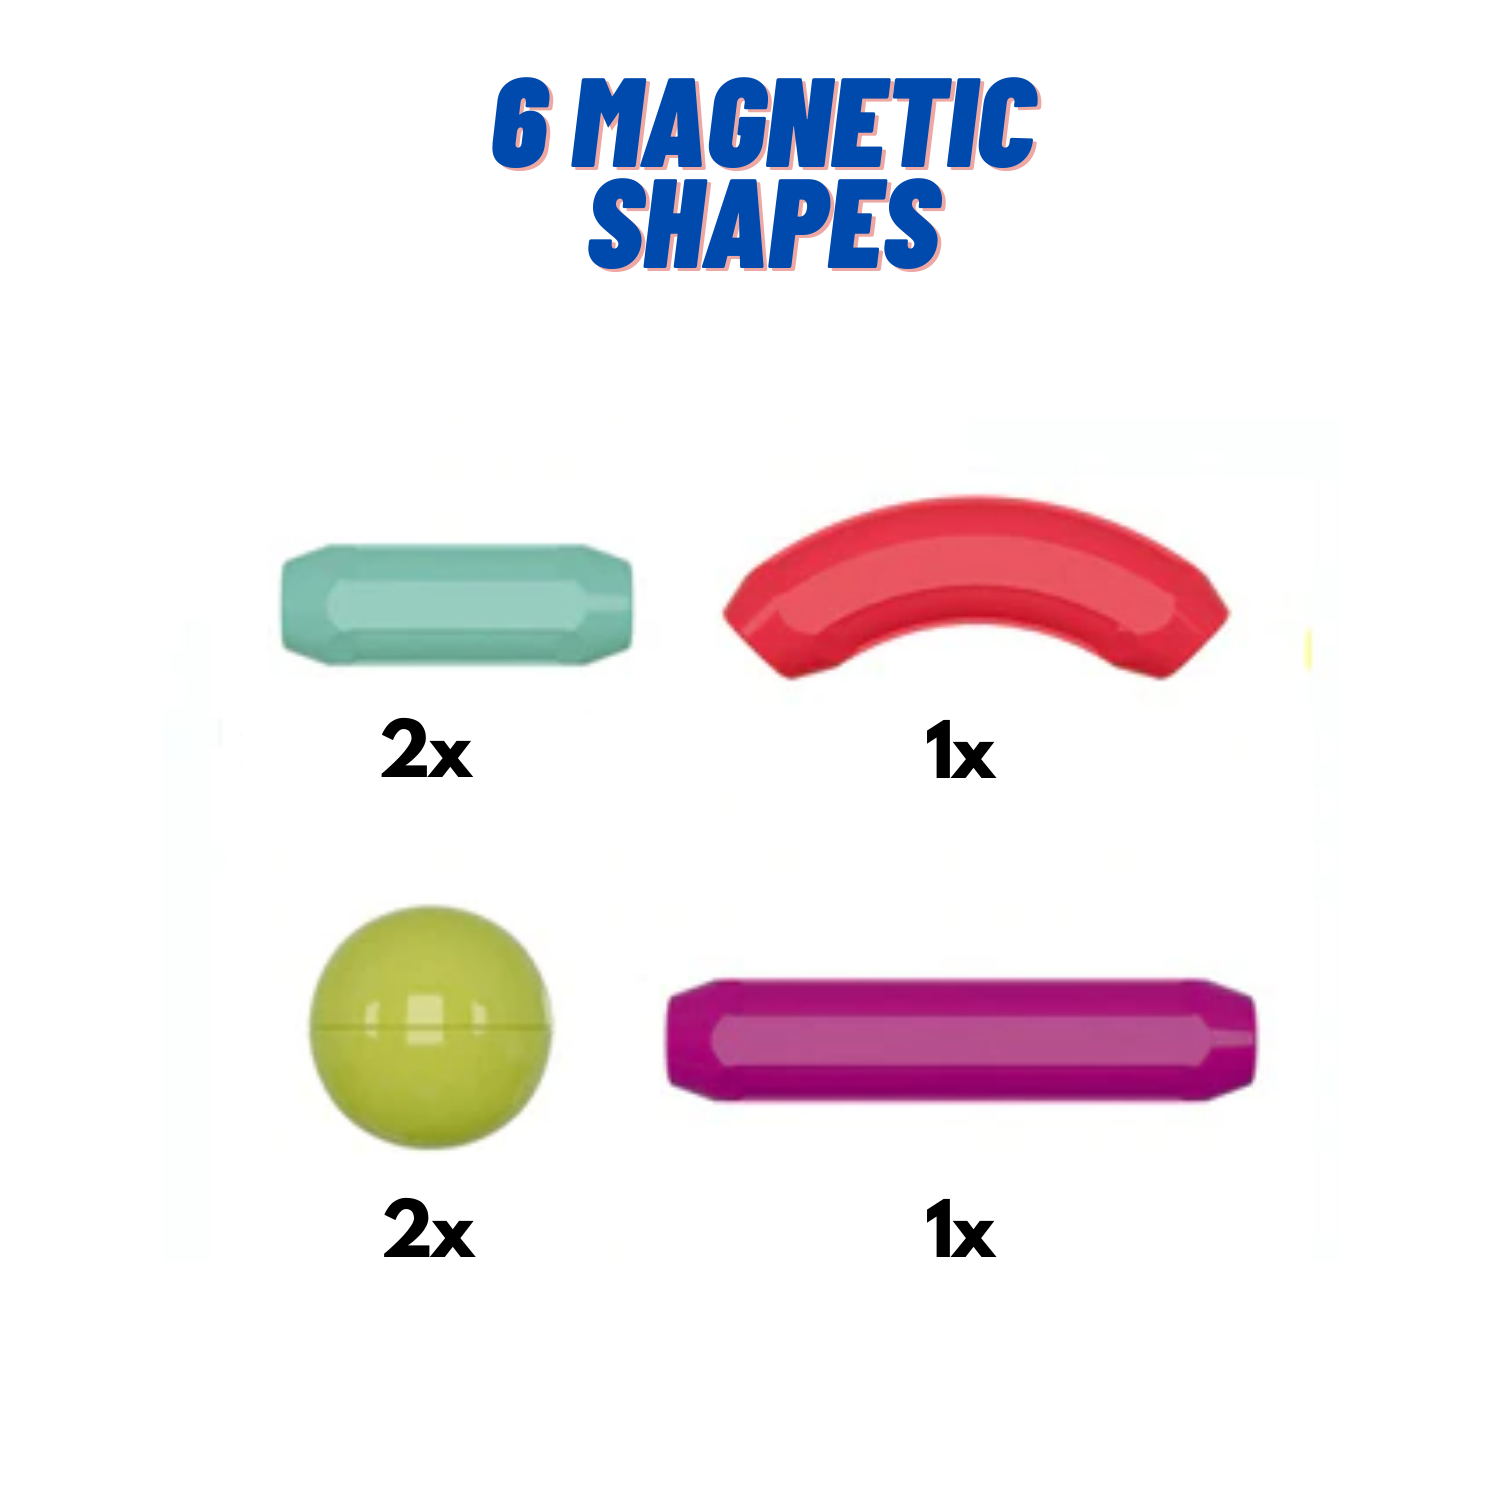 6x - Magnetic Shapes – The Groovd